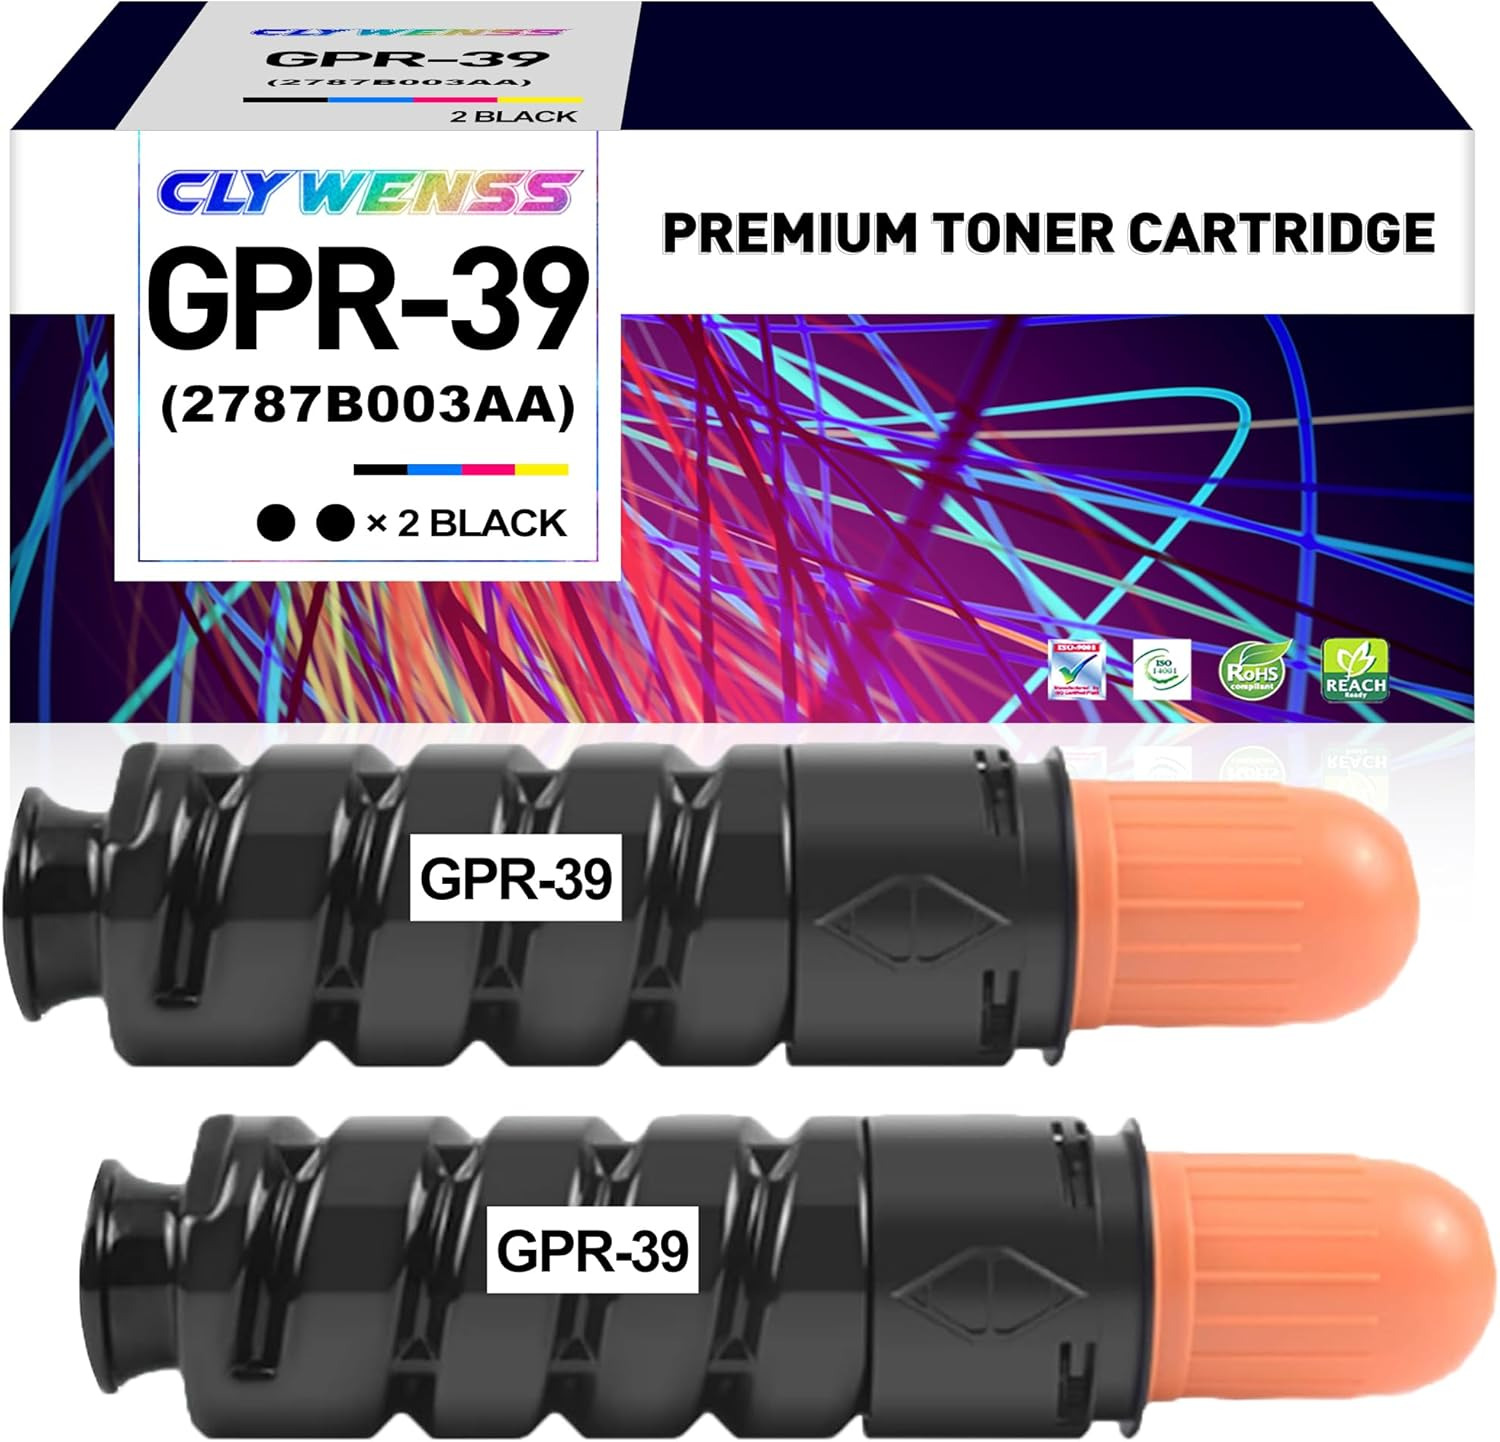 Compatible 2787B003AA Black Toner Cartridge Replacement for Canon GPR-39 GPR39 f